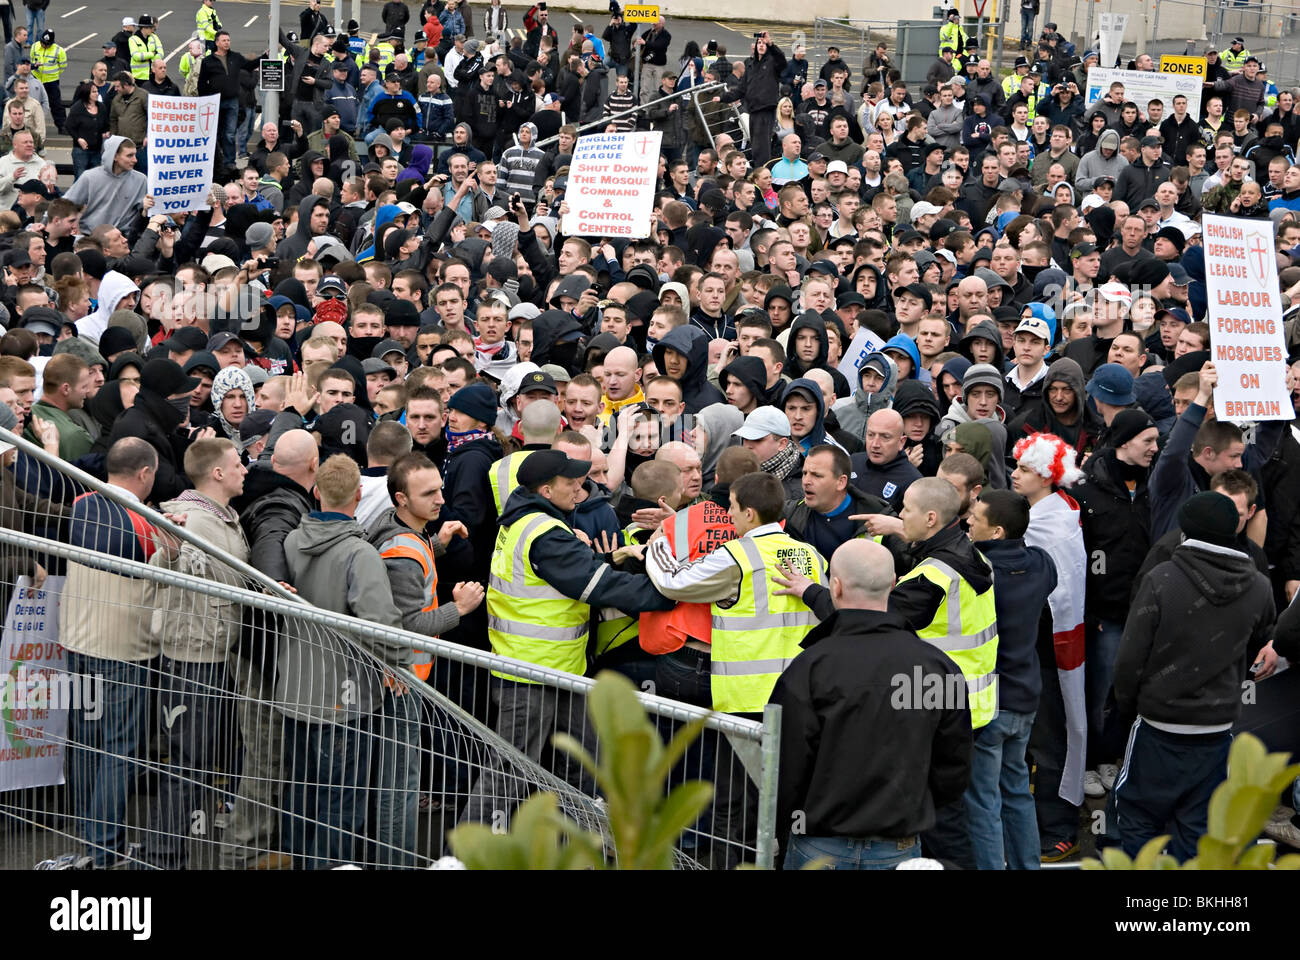 English defense league right wing protest again mosque in dudley march 2010 fighting amongst themselves Stock Photo